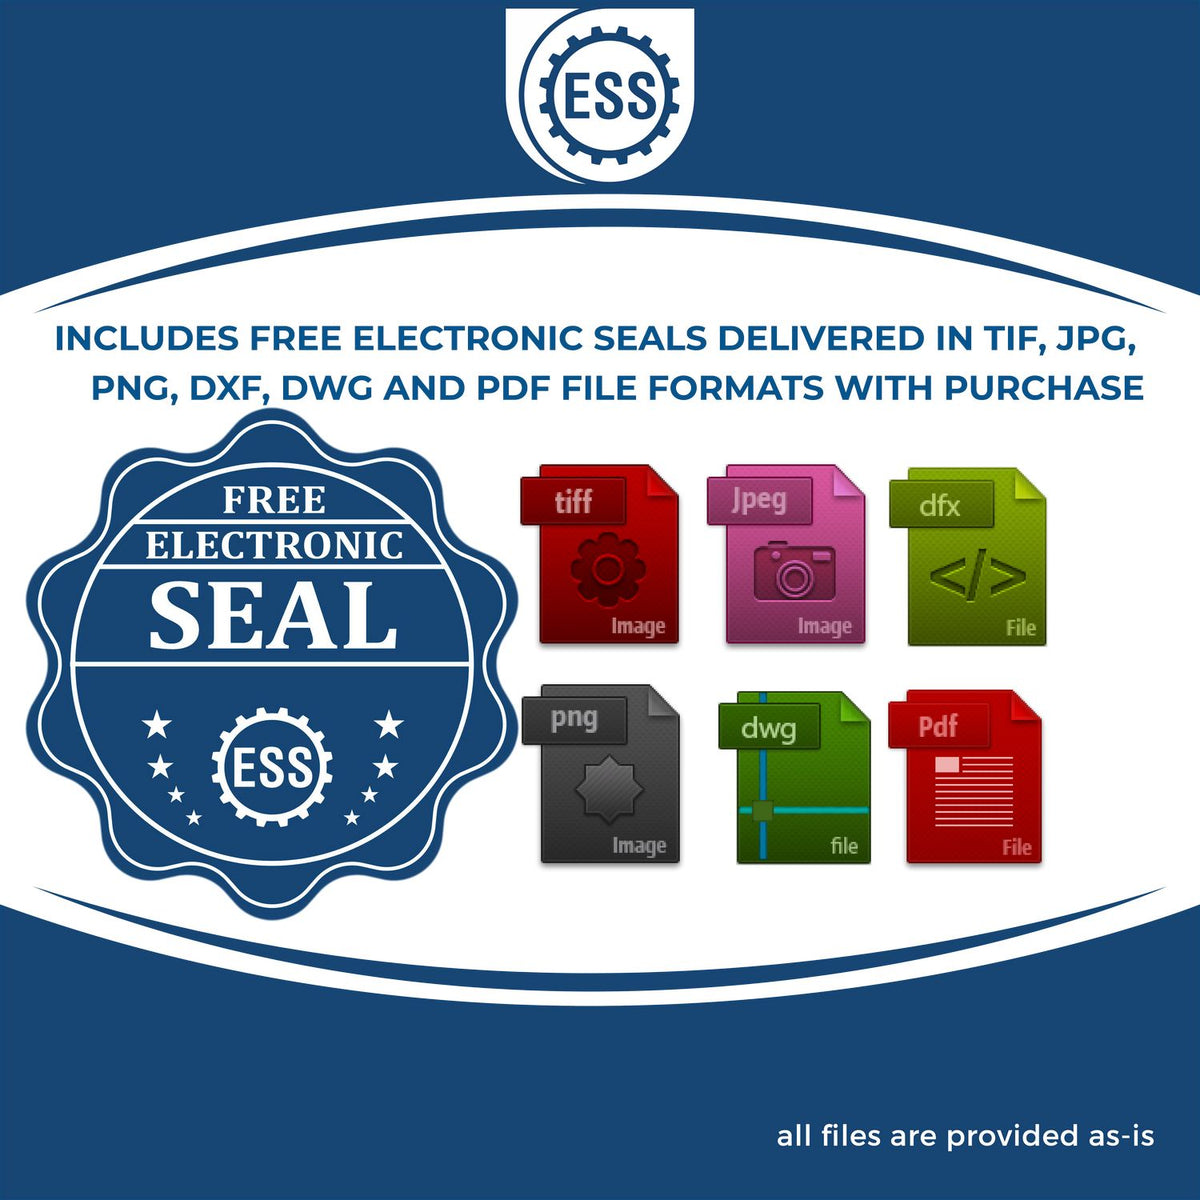 An infographic for the free electronic seal for the Slim Pre-Inked State Seal Notary Stamp for Ohio illustrating the different file type icons such as DXF, DWG, TIF, JPG and PNG.